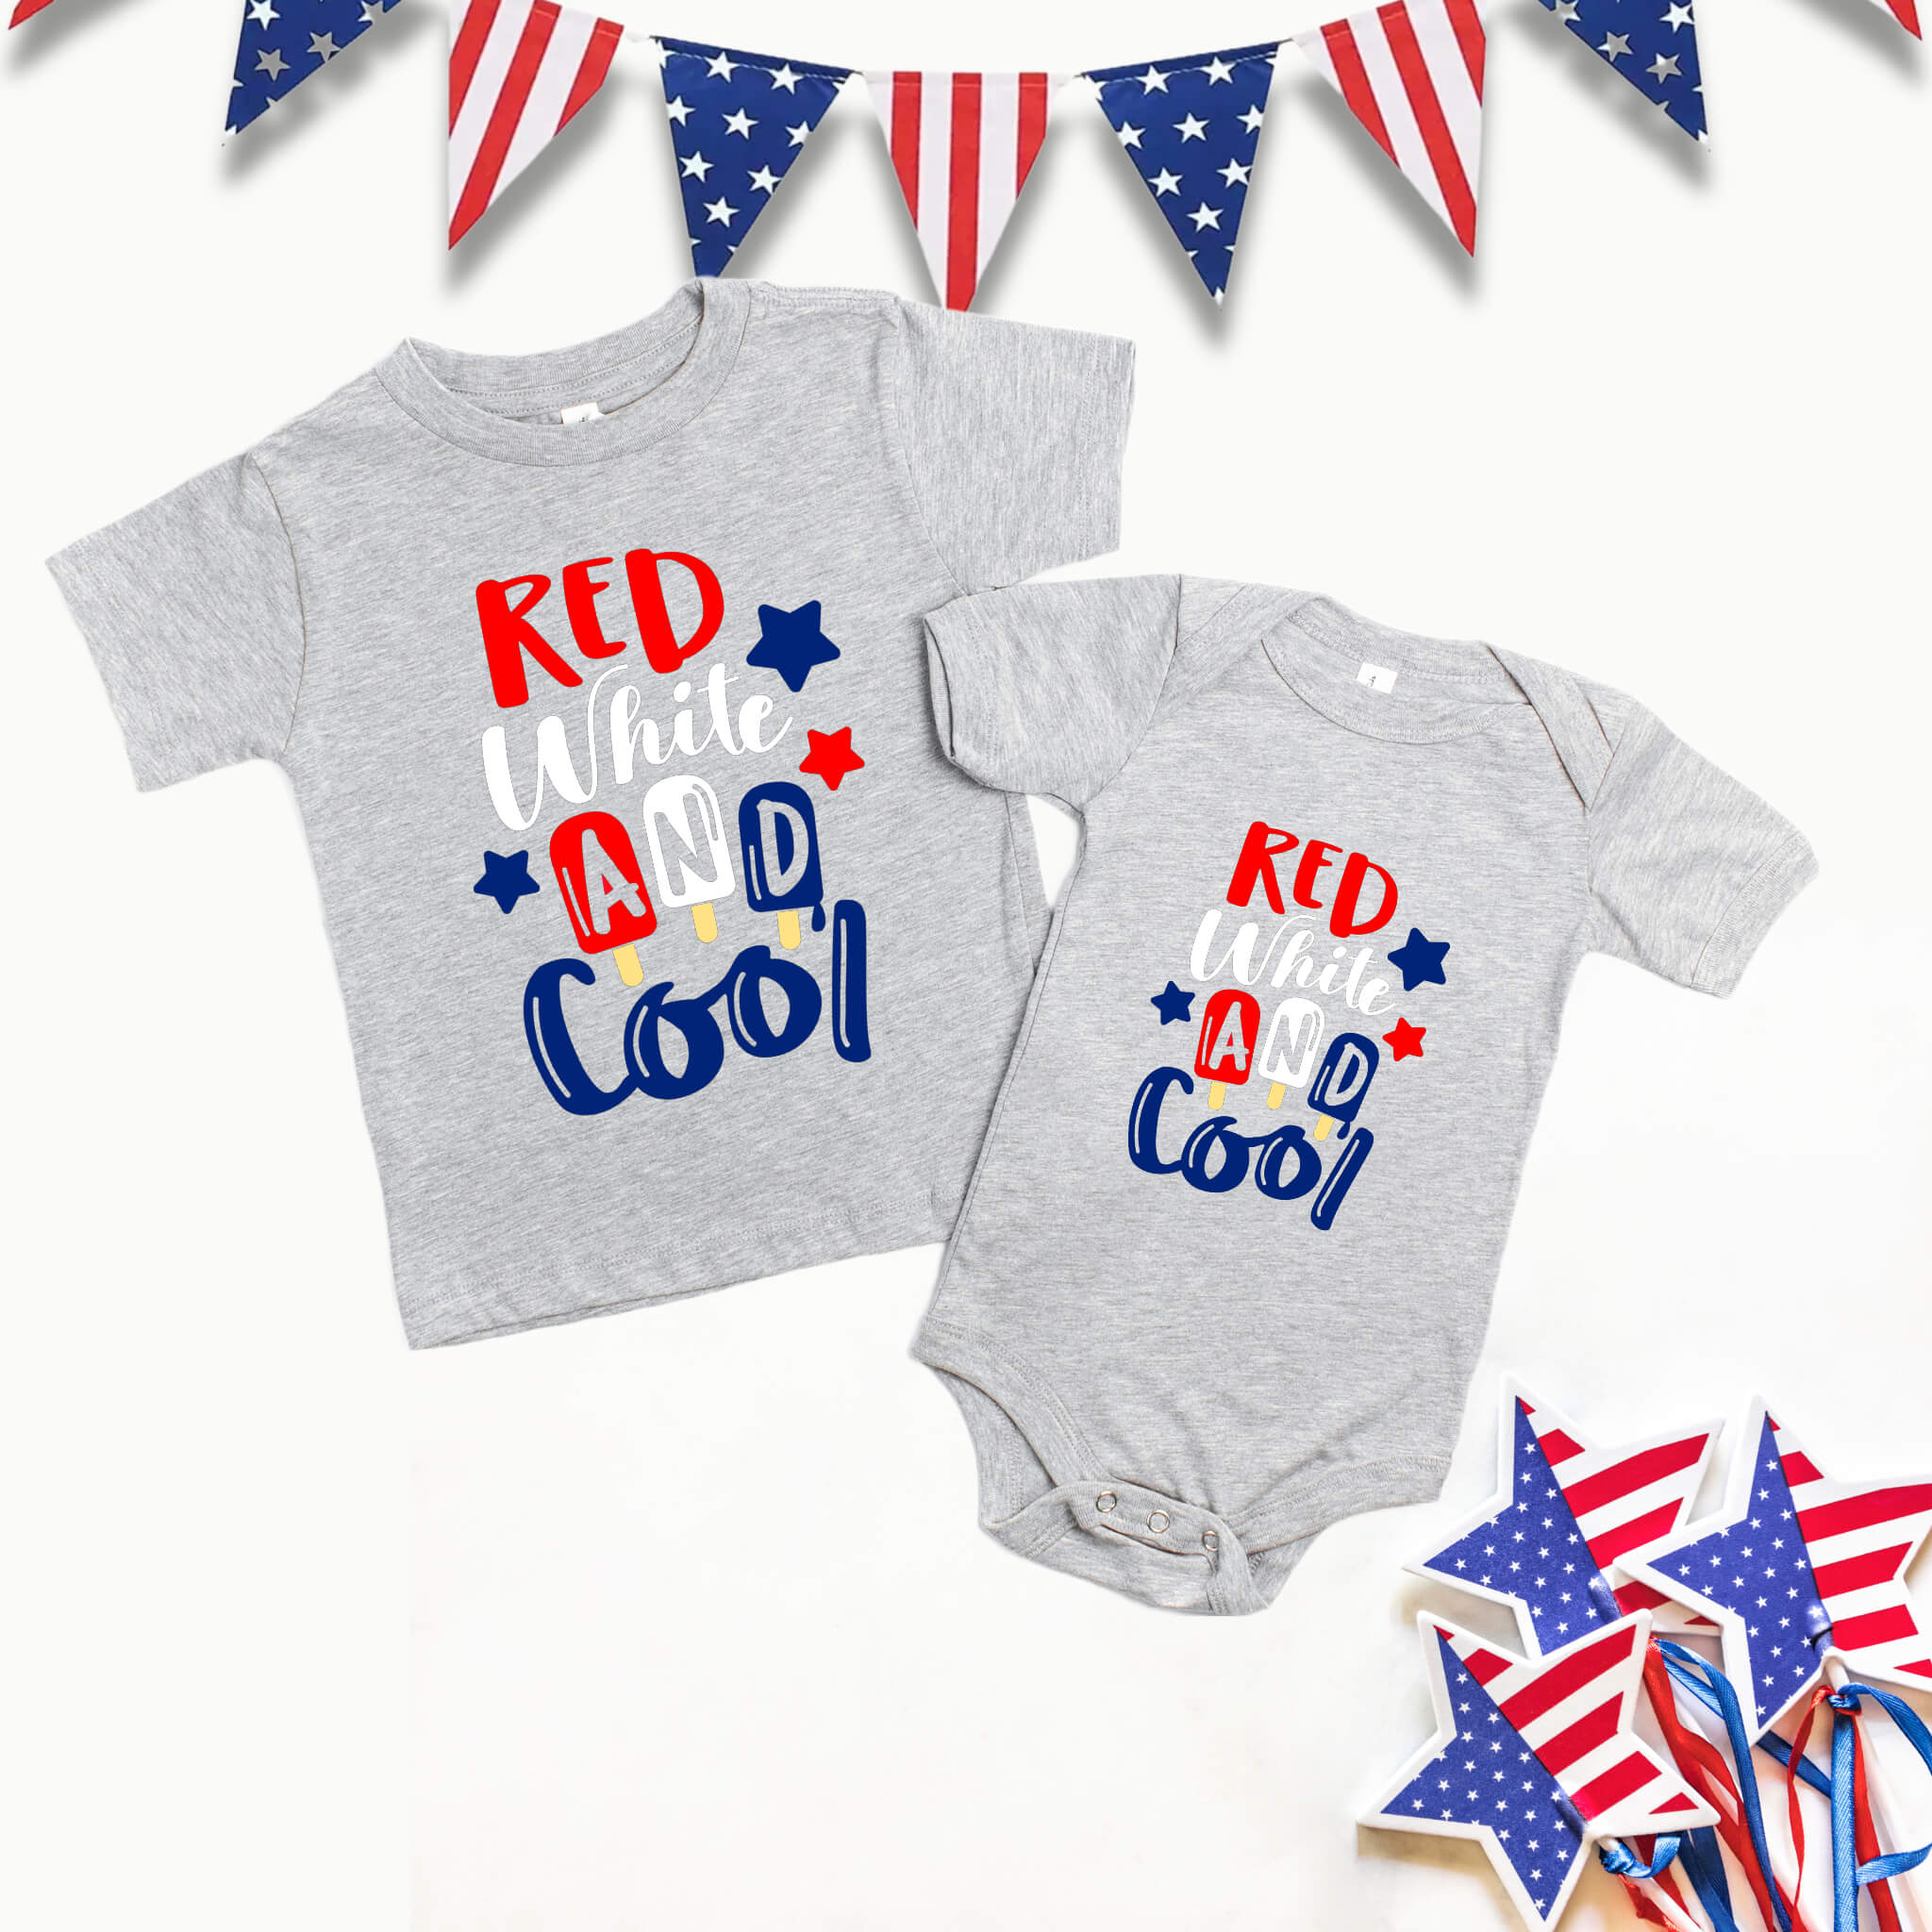 4th of July - Red White & Cool Patriotic Boy’s Girl’s Unisex Graphic Print Onesie / T-shirt